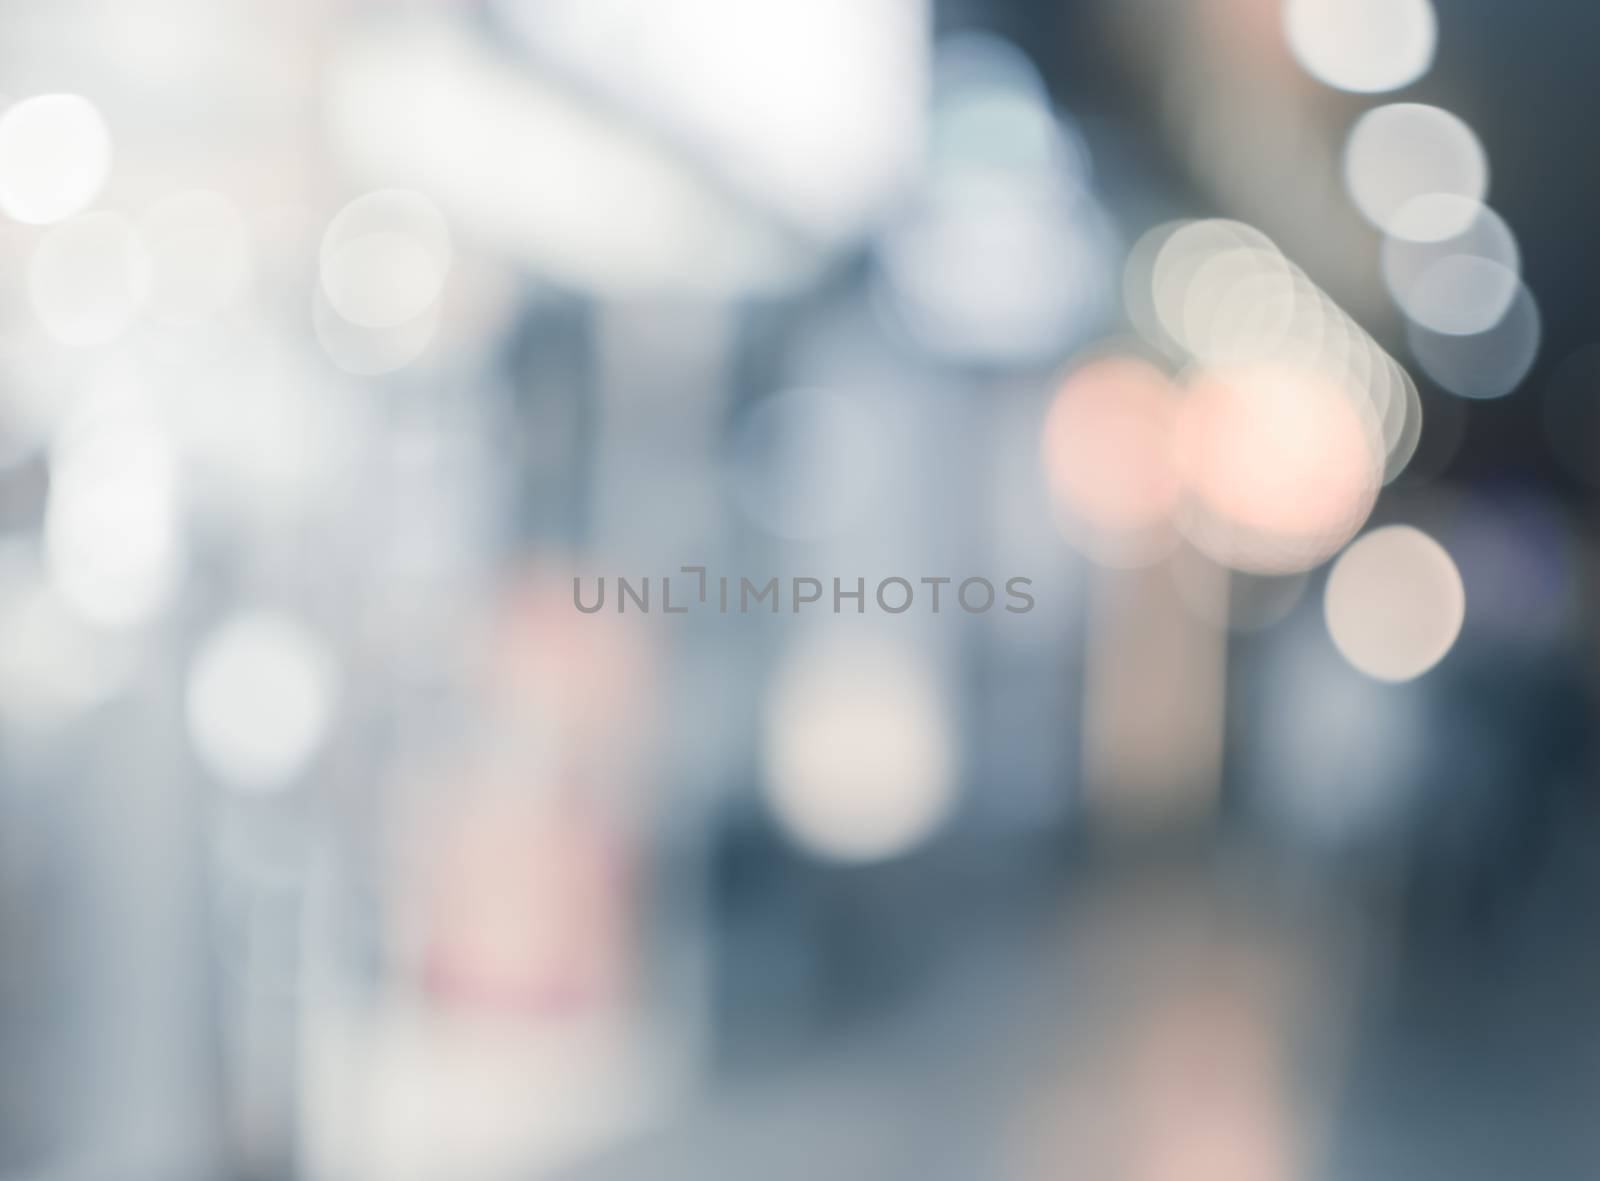 Abstract background of shopping mall, shallow depth of focus.